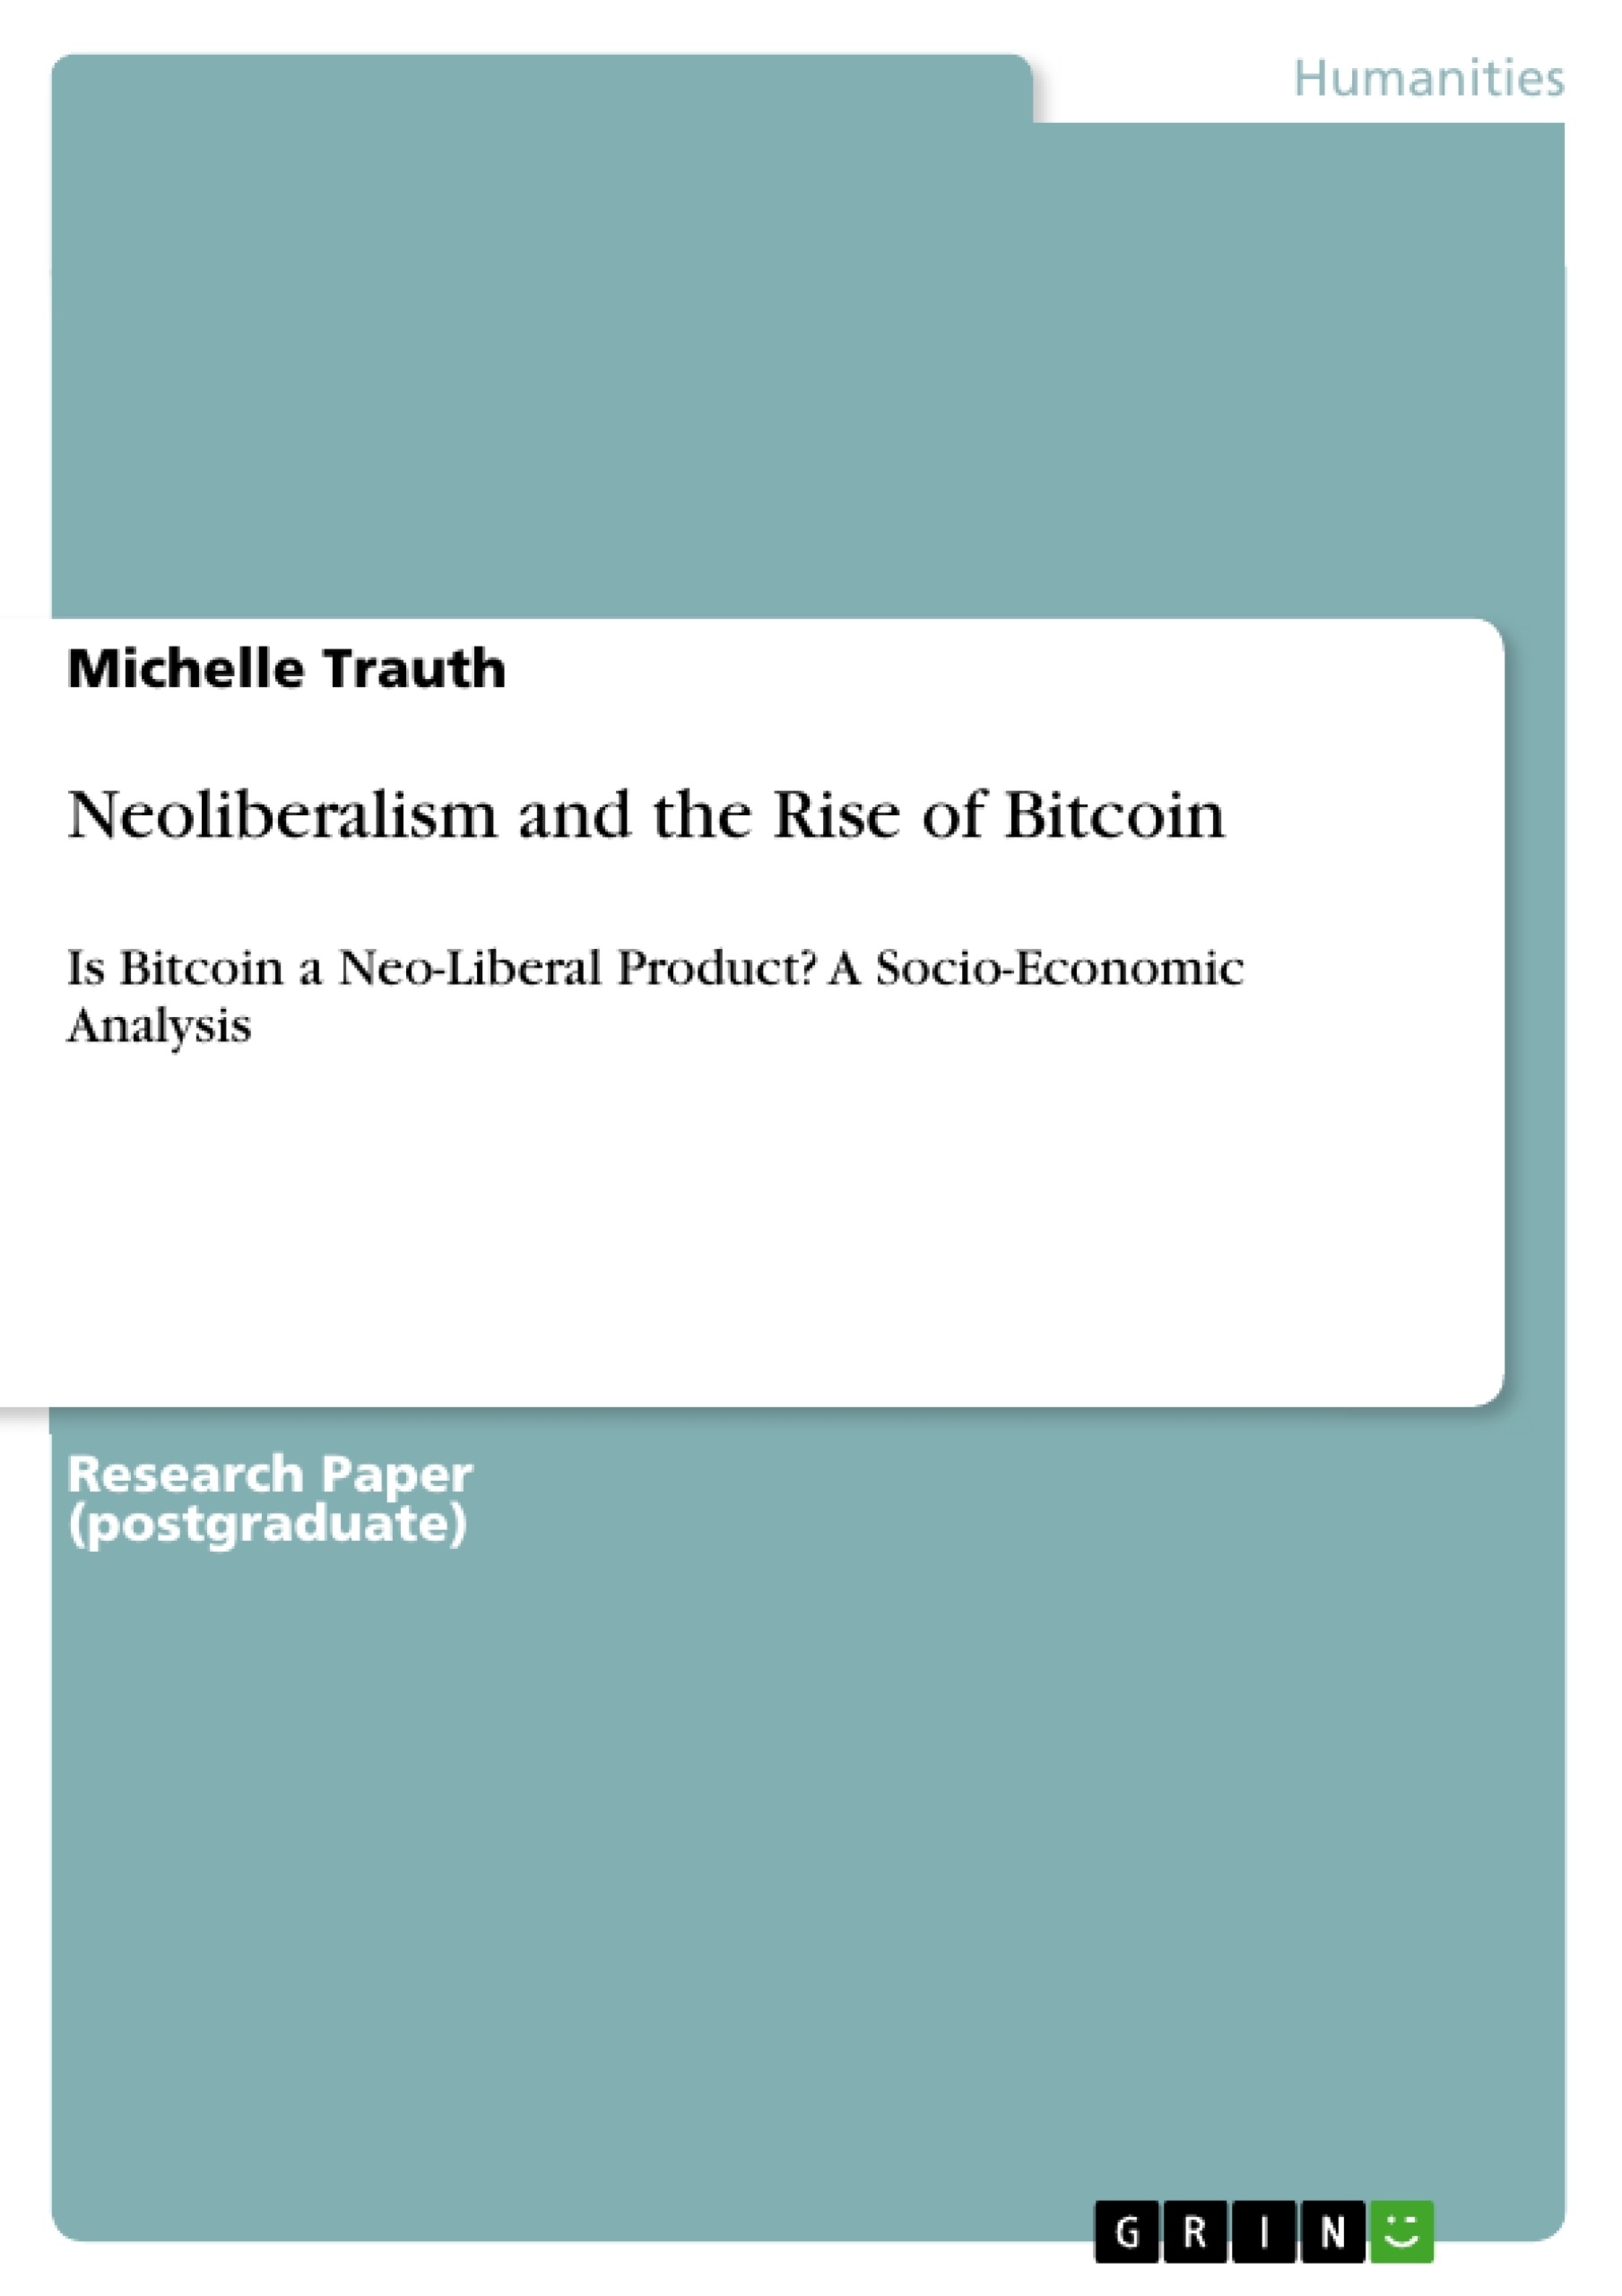 Titre: Neoliberalism and the Rise of Bitcoin